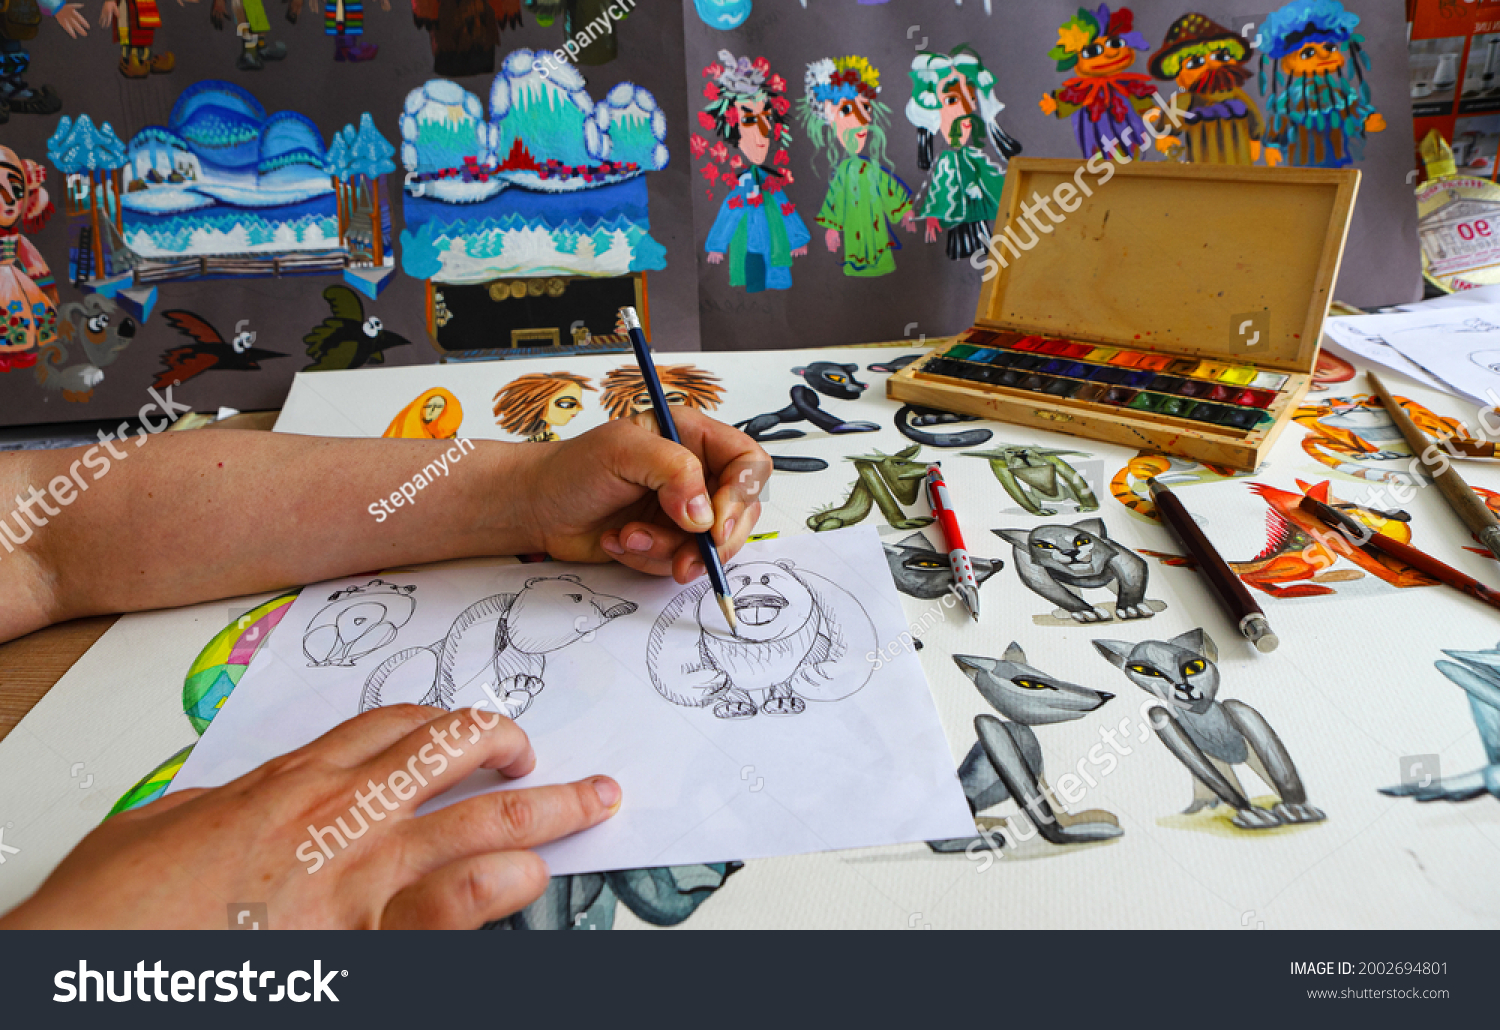 The animator draws with a pencil and draws characters from cartoons, comics or puppet shows. Preparing to make a doll. The designer creates sketches. Comics, cartoons, puppet theater #2002694801